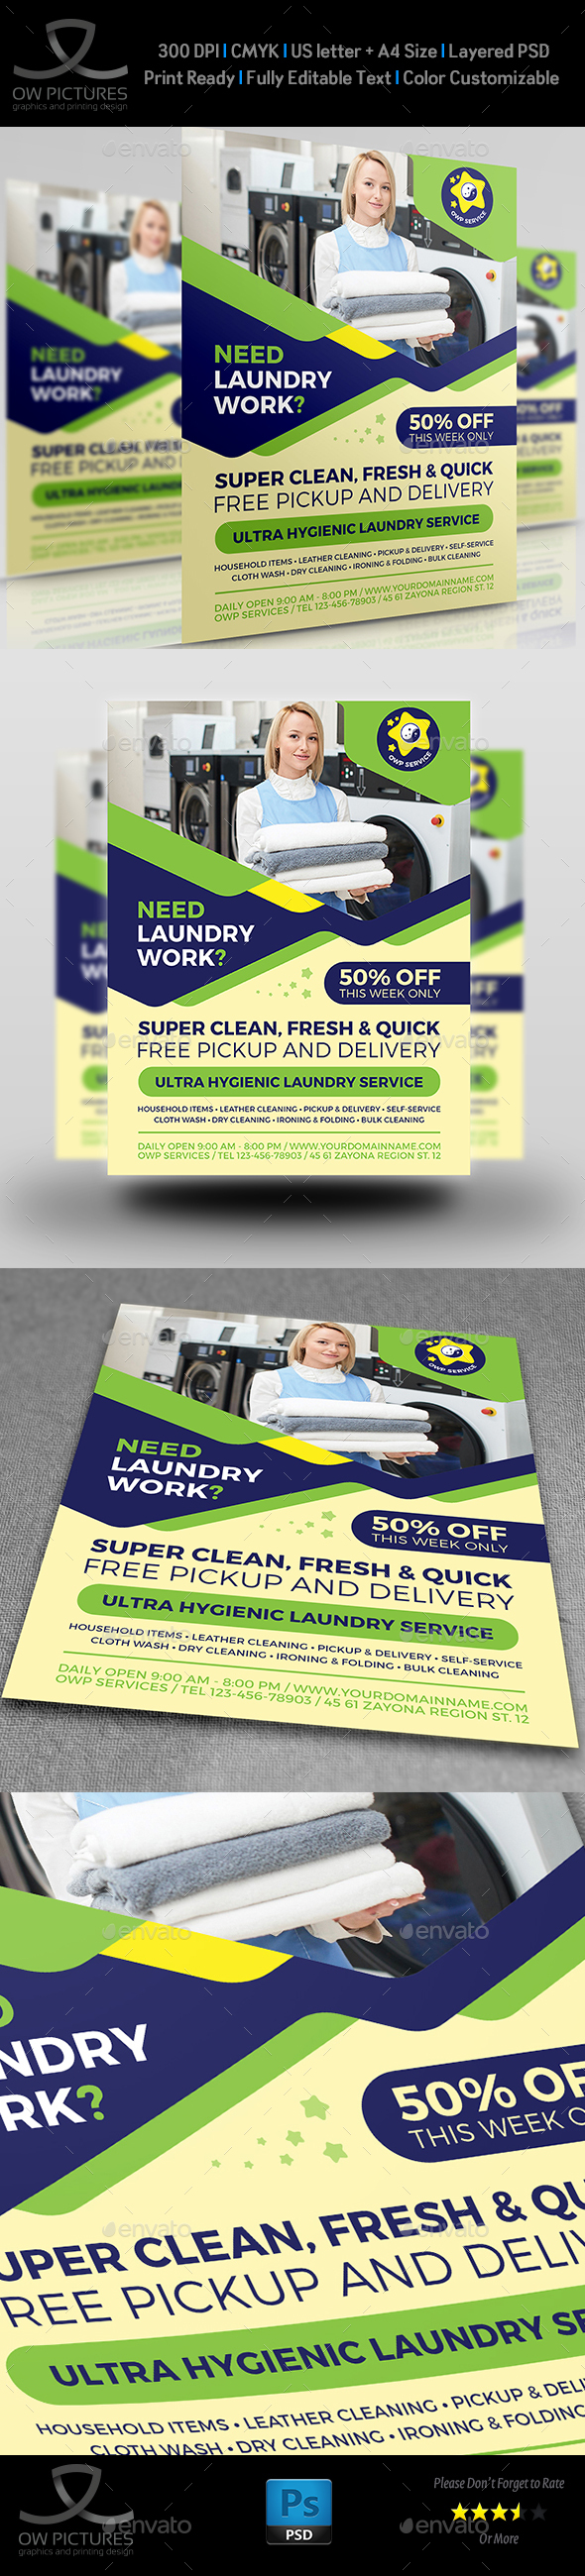 Laundry Services Flyer Template